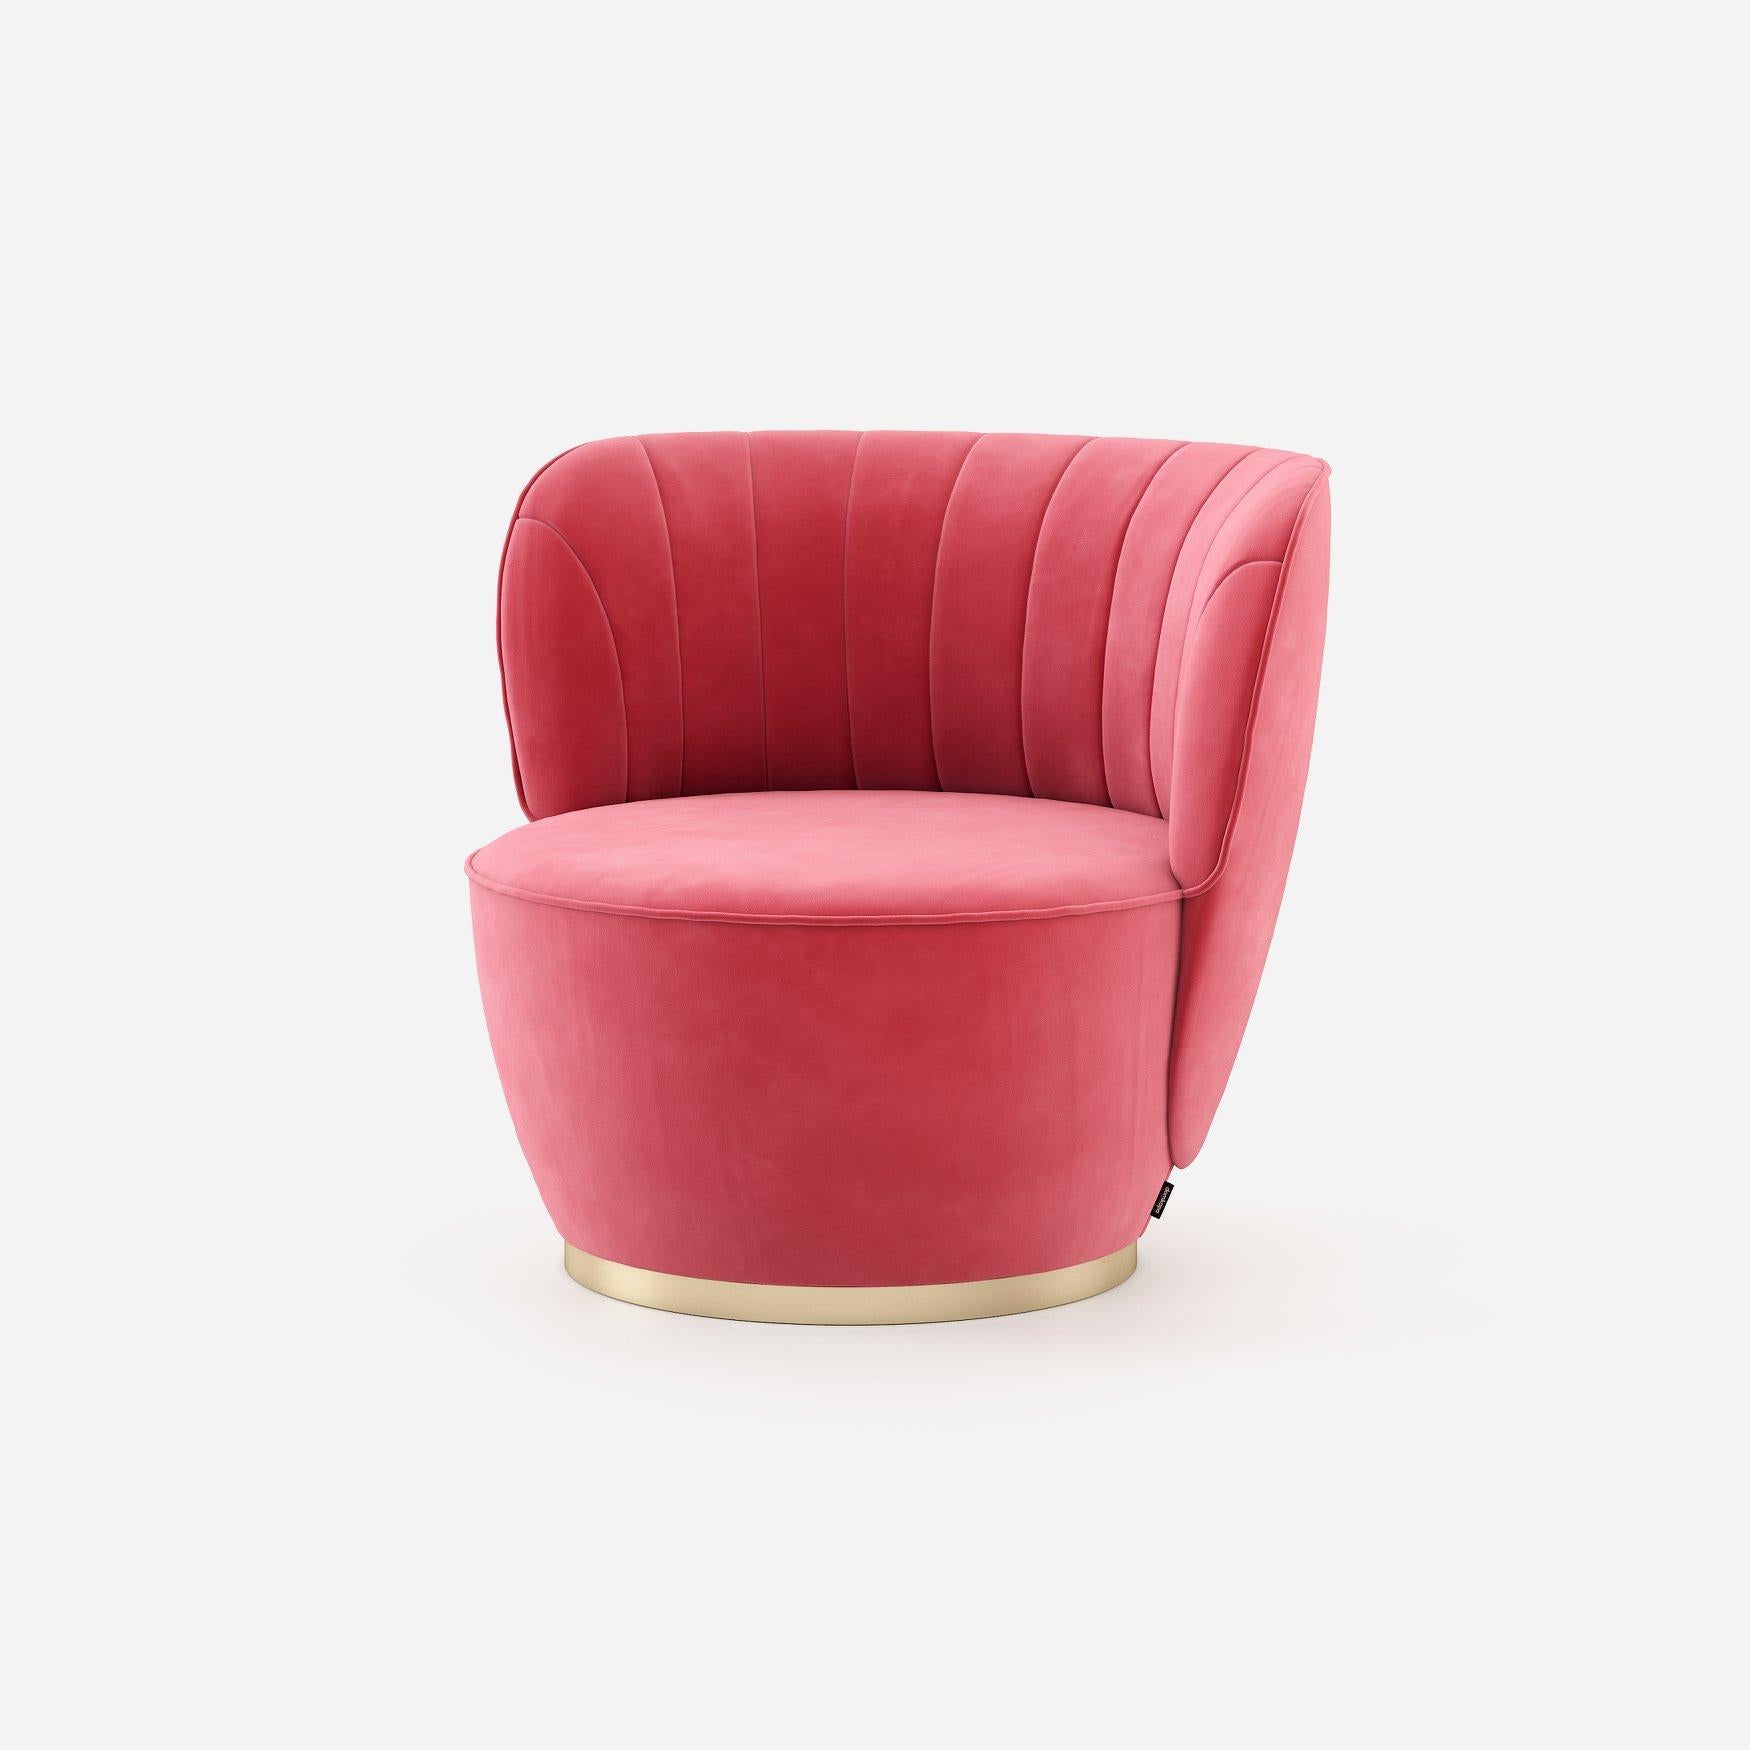 This armchair holds an exclusive language for its peculiar design. With a deep convex back, this piece presents a big and round seat to provide all the comfort you need. The inner part of the back includes several lines stitched across the piece, is